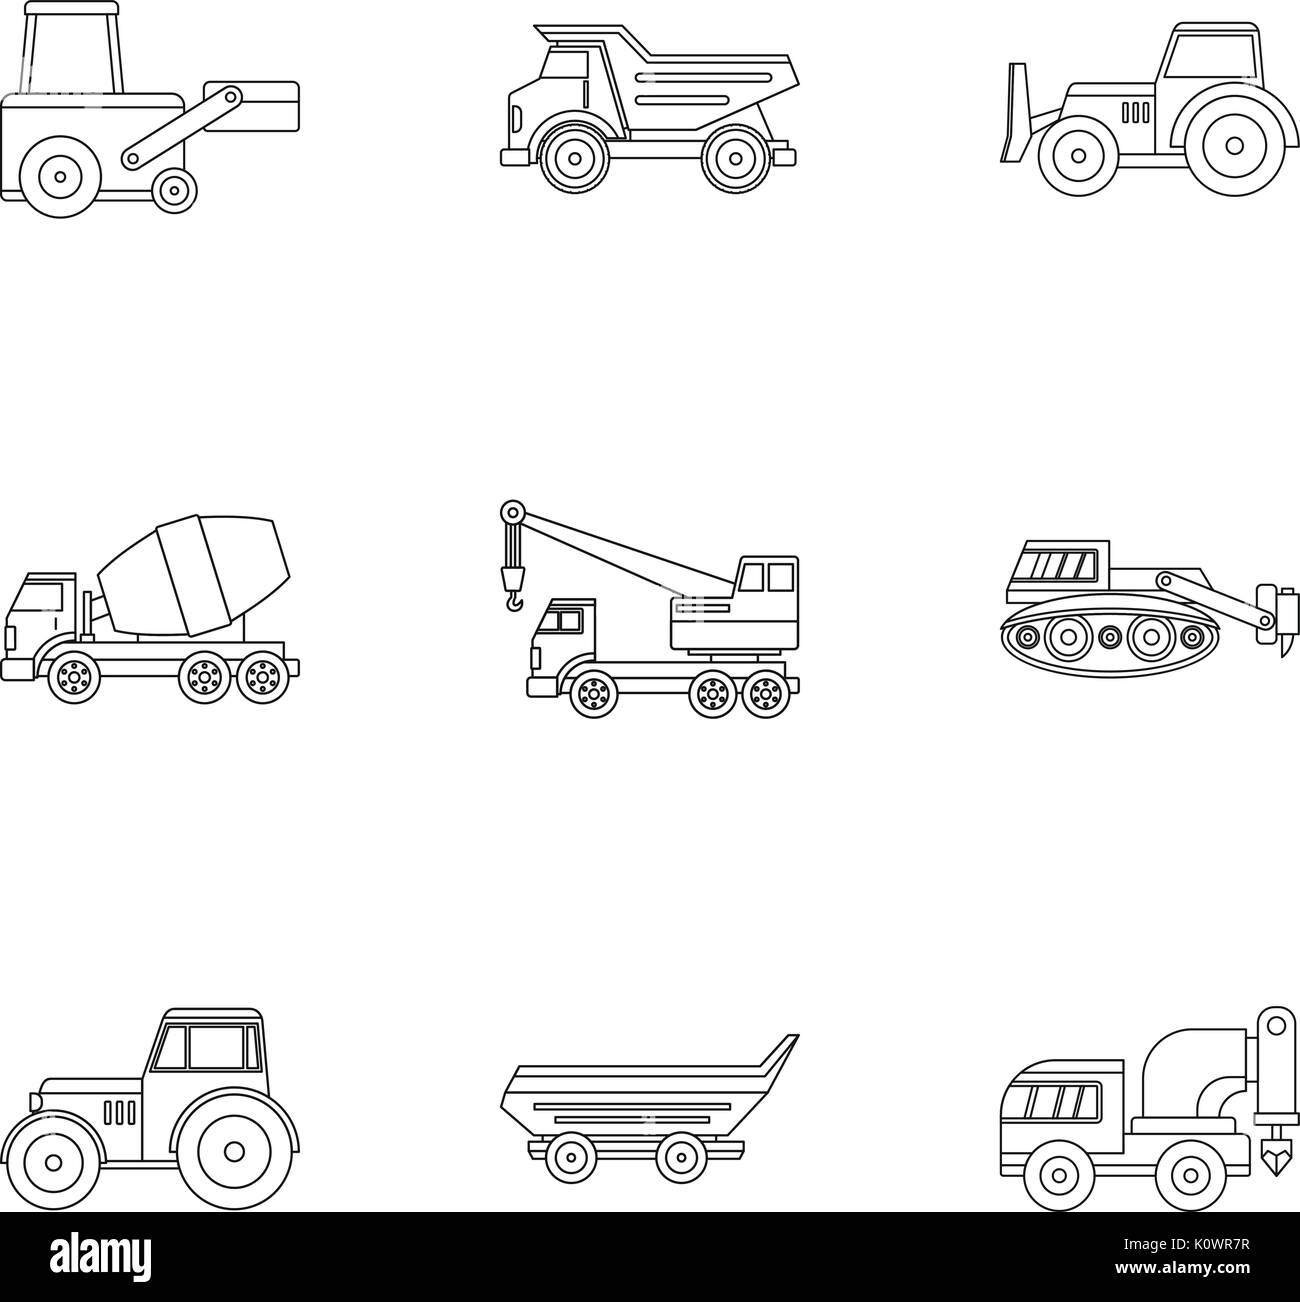 Construction heavy vehicle icon set, outline style Stock Vector